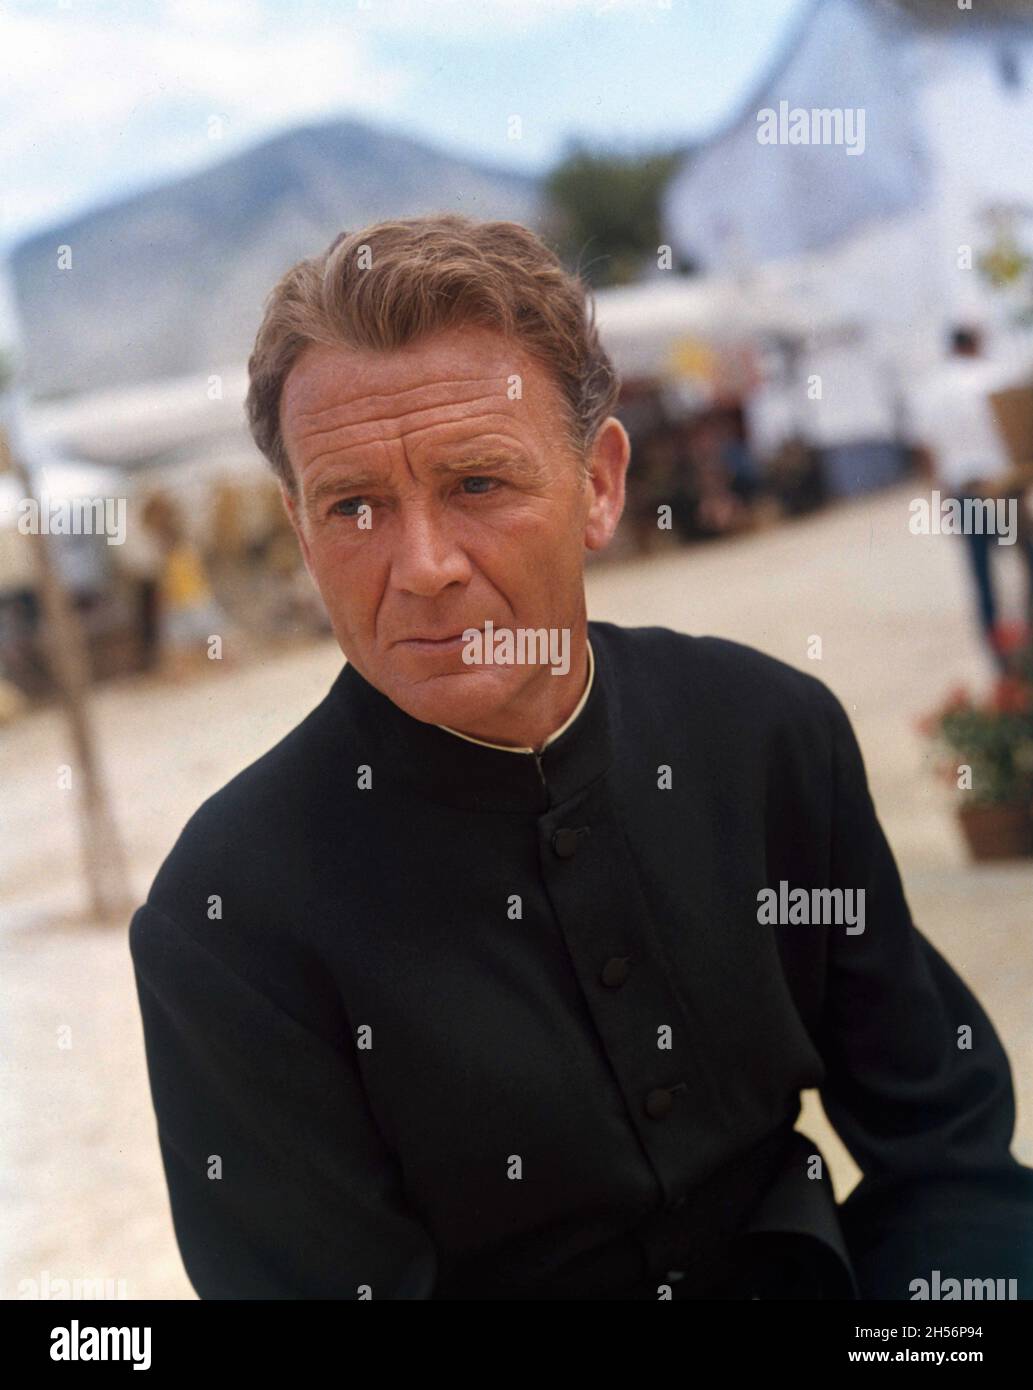 JOHN MILLS in costume as Father Keogh on set candid portrait during filming of THE SINGER NOT THE SONG 1961 director GEORGE WARD BAKER novel Audrey Erskine-Lindop screenplay Nigel Balchin costume design Yvonne Caffin The Rank Organisation Stock Photo